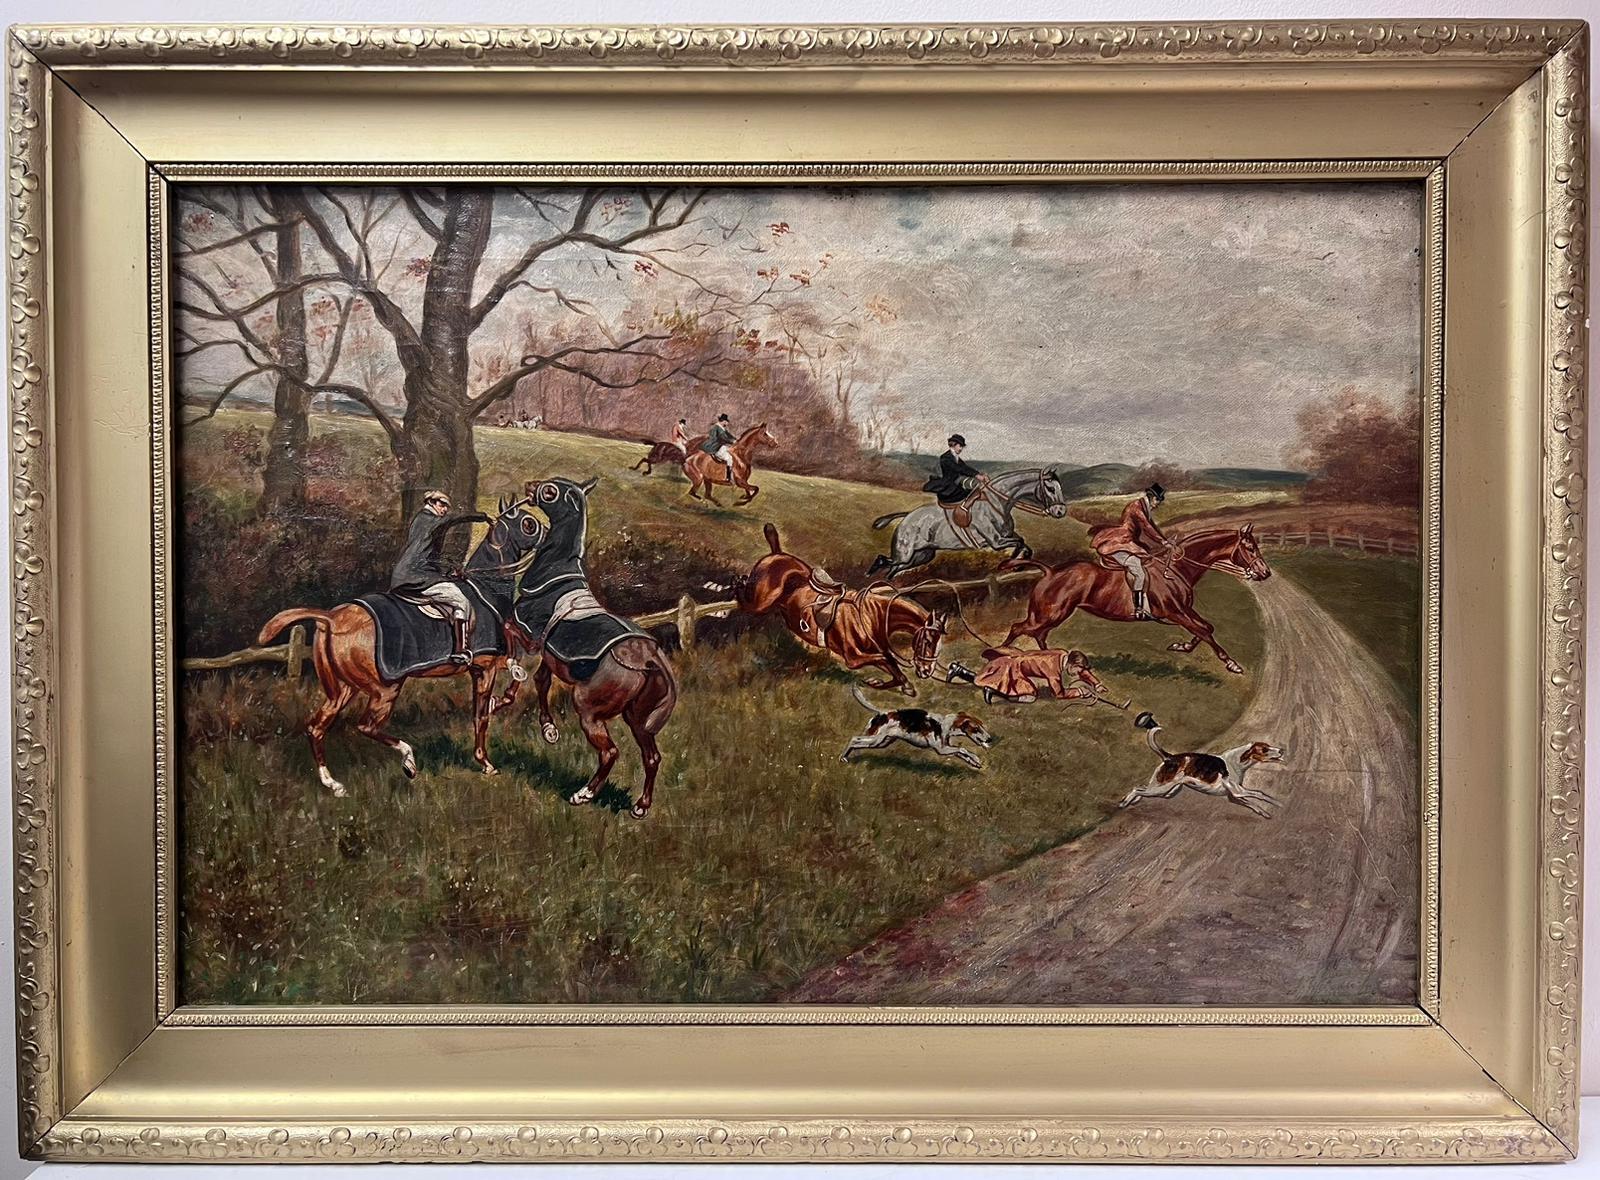 The Fox Hunt
English School (19th Century)
oil on canvas, framed
framed: 21 x 29 inches
canvas: 16 x 24 inches
provenance: private collection, England
condition: very good and sound condition, showing its age with some surface grime and age related